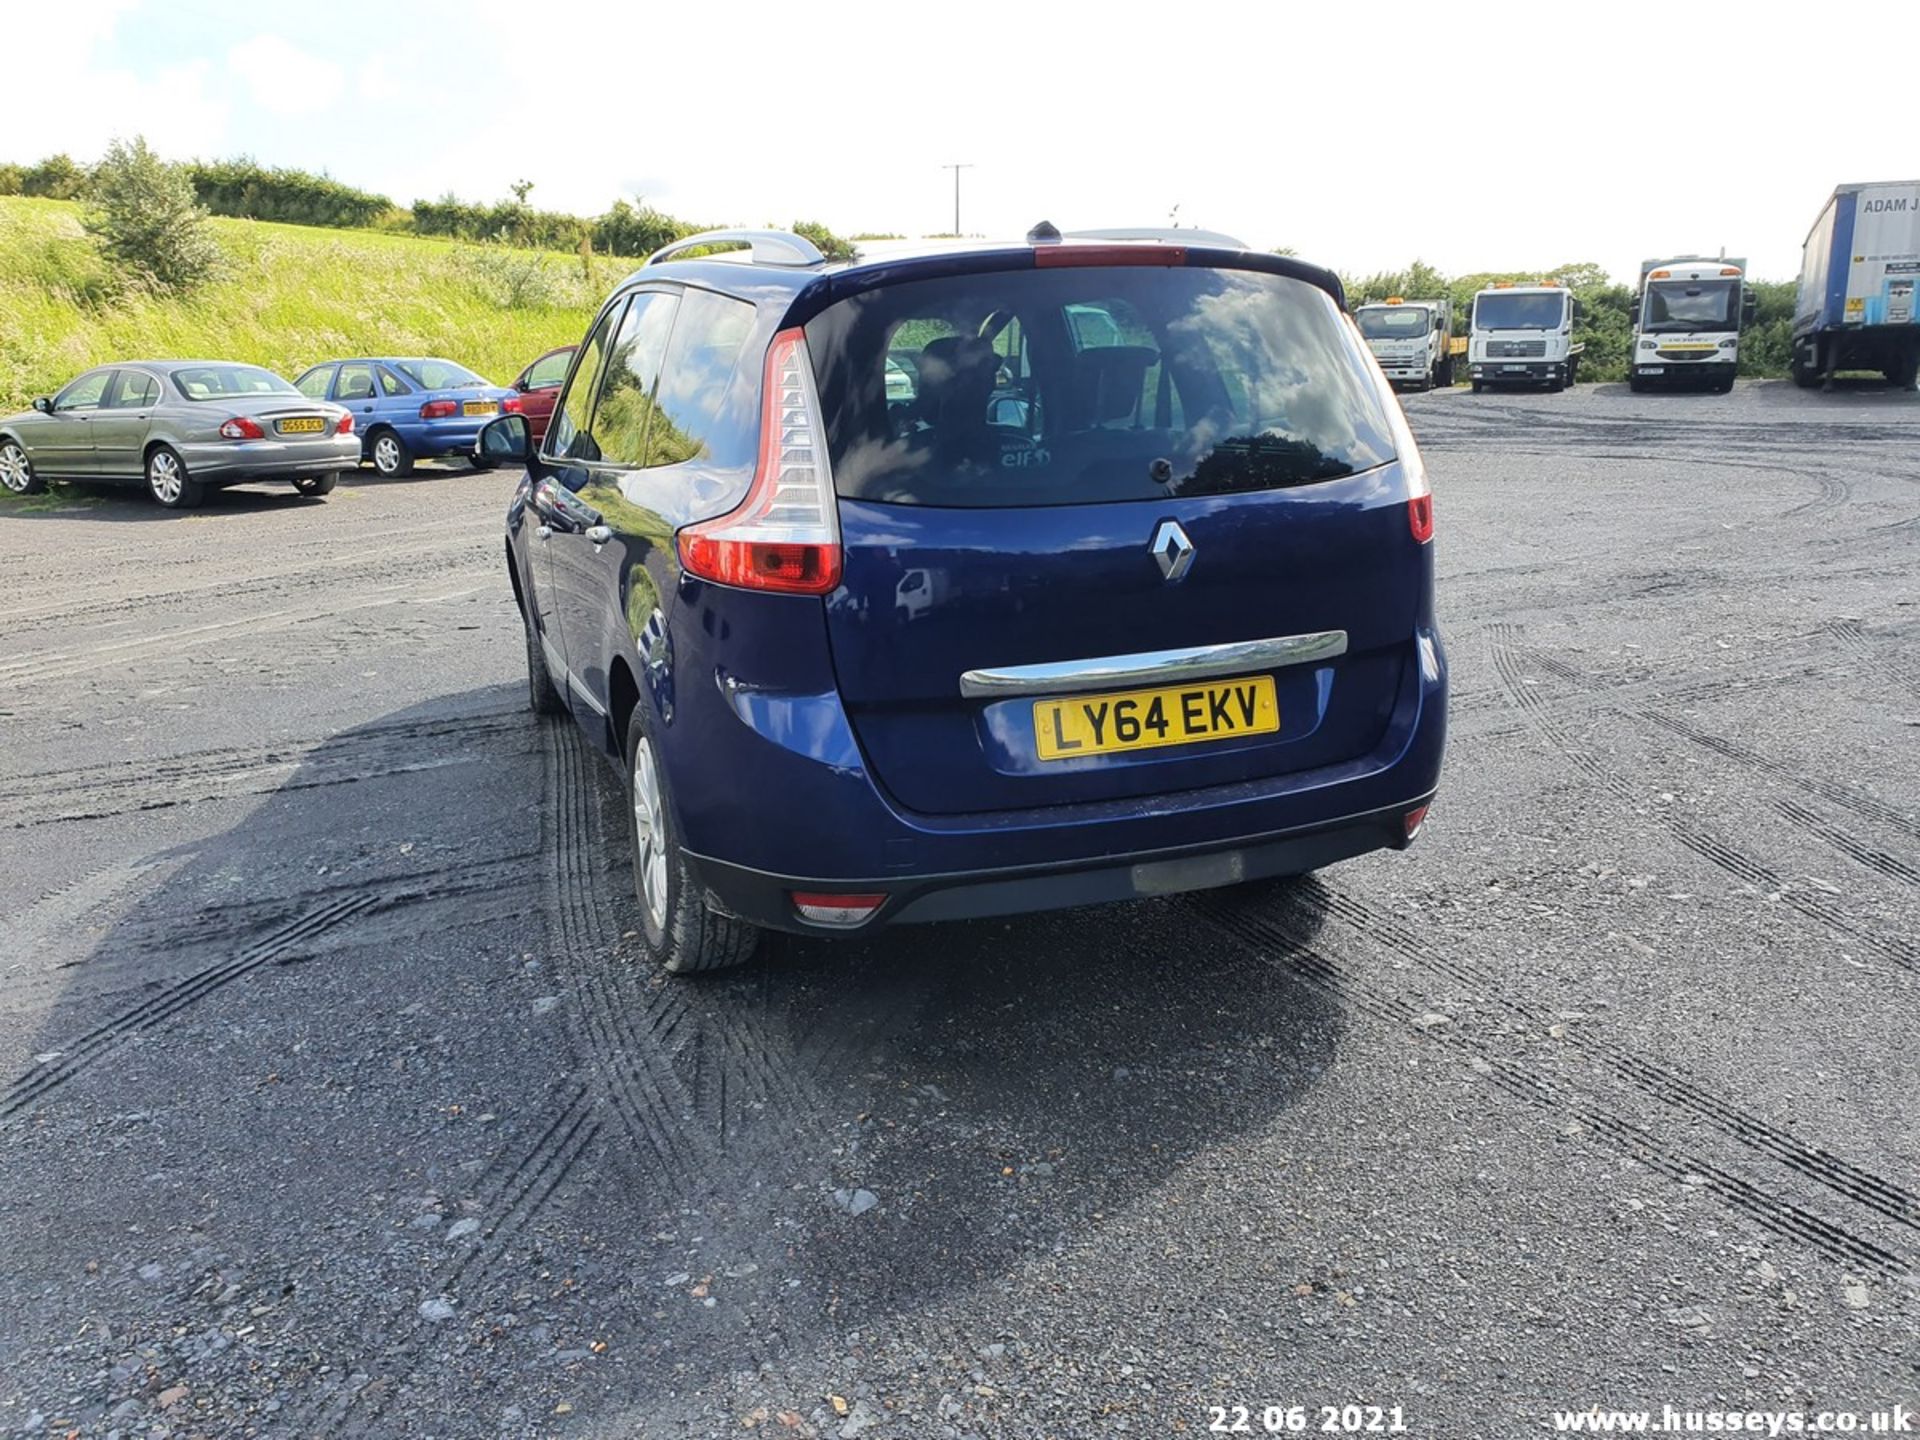 14/64 RENAULT GRAND SCENIC DY-QUE T-T D - 1461cc 5dr MPV (Blue, 152k) - Image 21 of 23